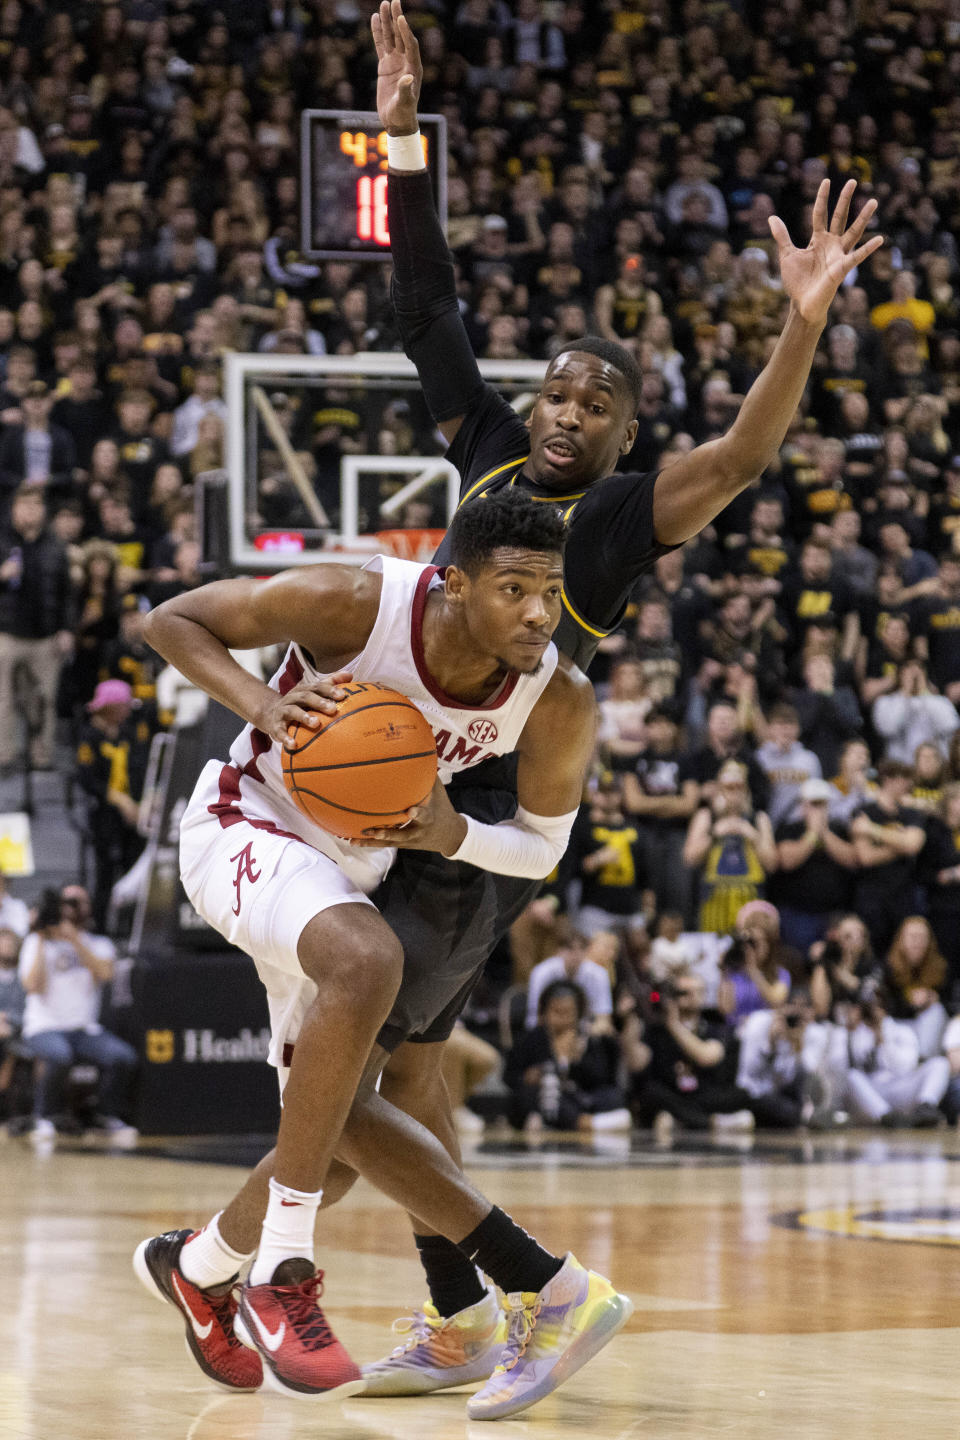 Alabama's Brandon Miller, left, pushes past Missouri's D'Moi Hodge during the first half of an NCAA college basketball game Saturday, Jan. 21, 2023, in Columbia, Mo. (AP Photo/L.G. Patterson)